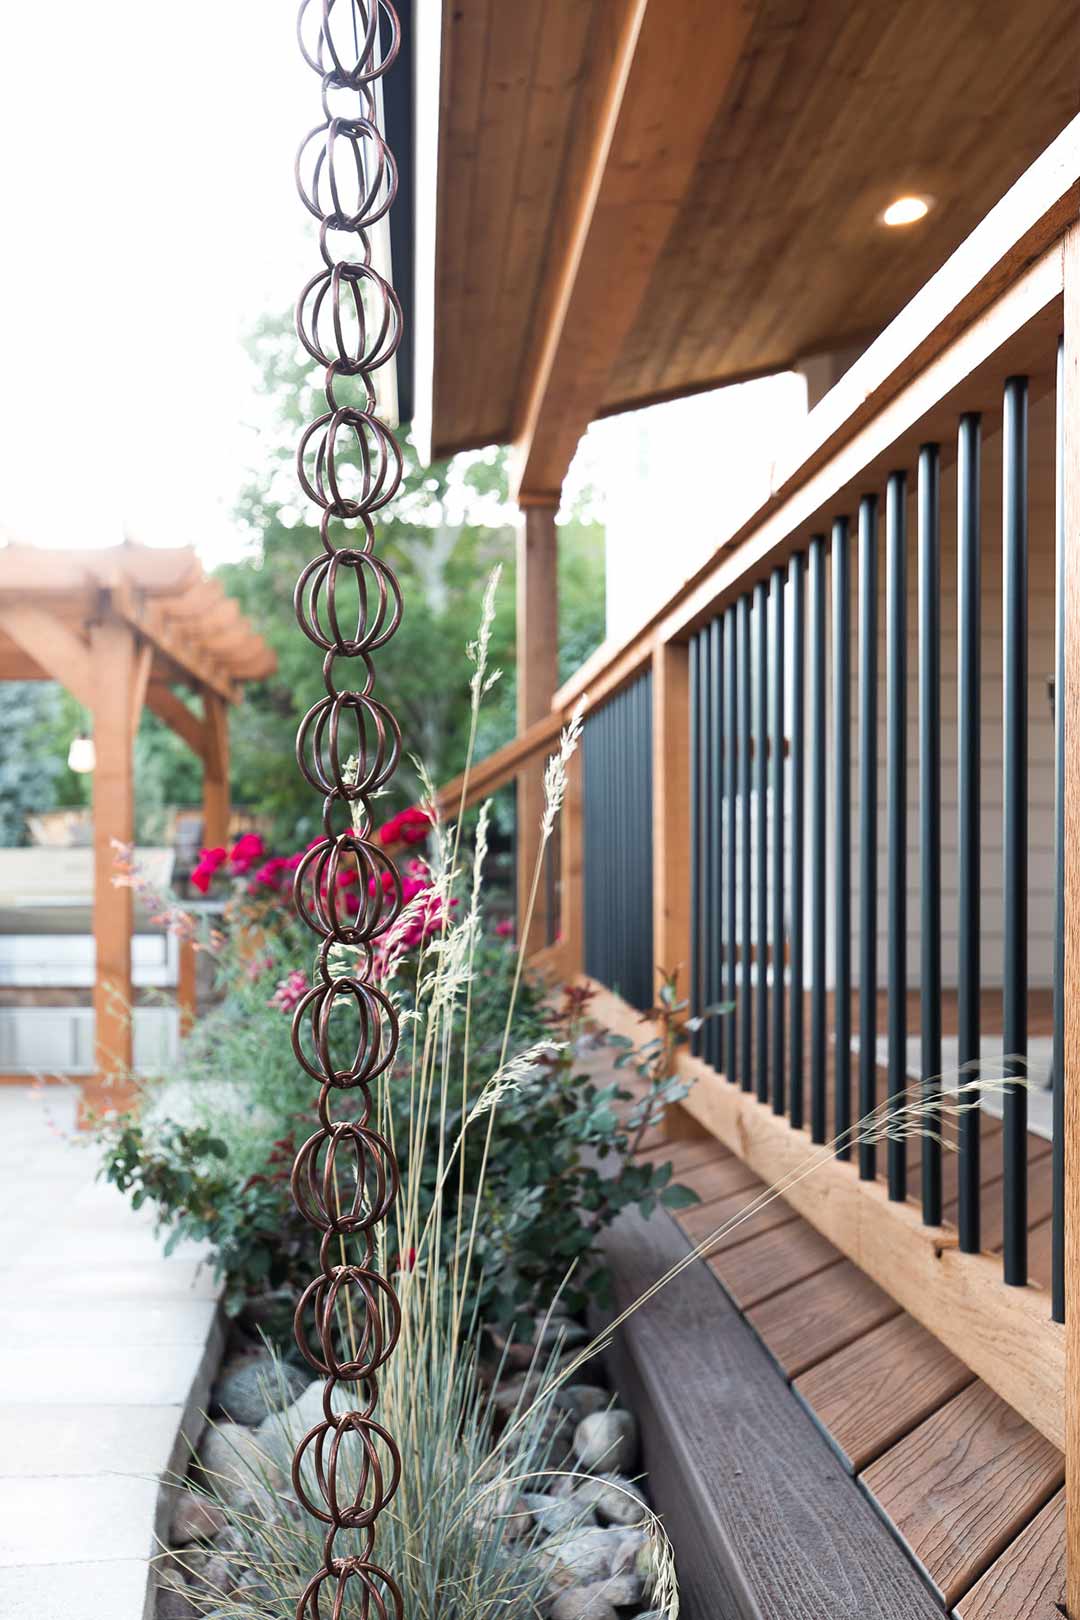 Custom copper rain chains accent the modern patio railing installed by Freestone Design-Build in Fort Collins Colorado